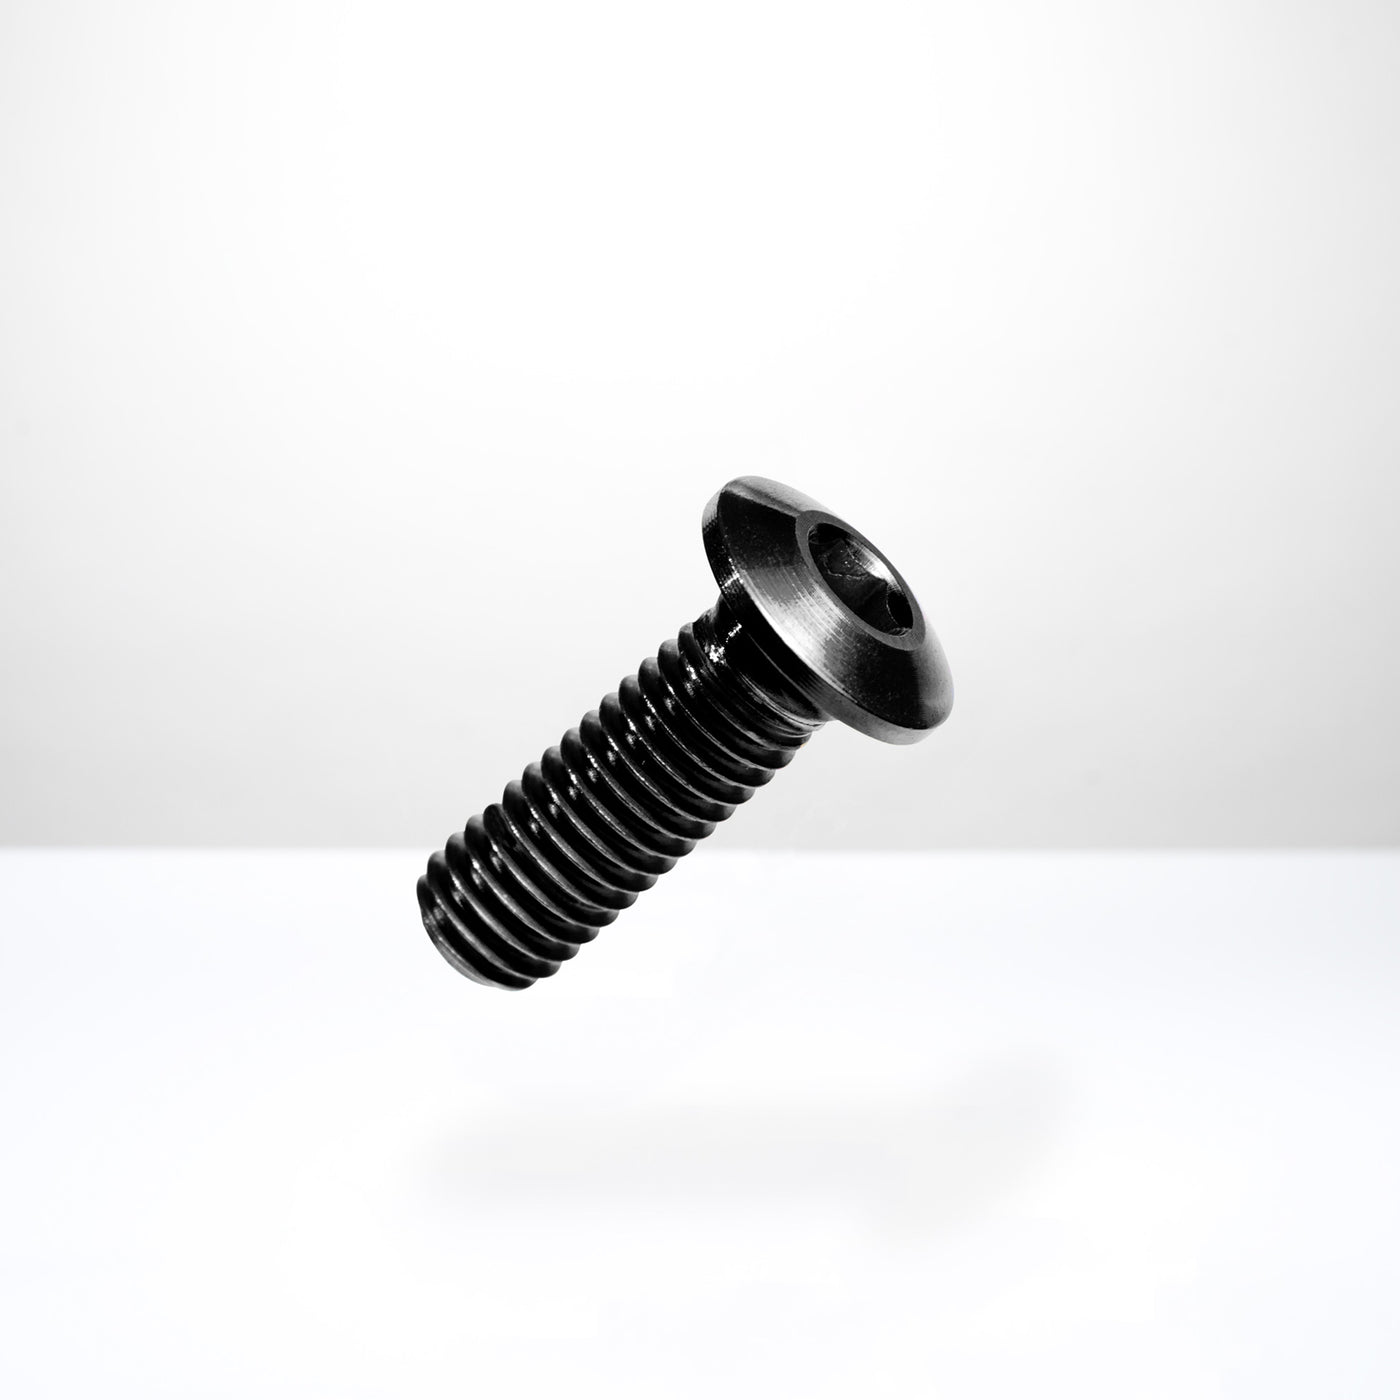 LoPro Ti Cage Bolts